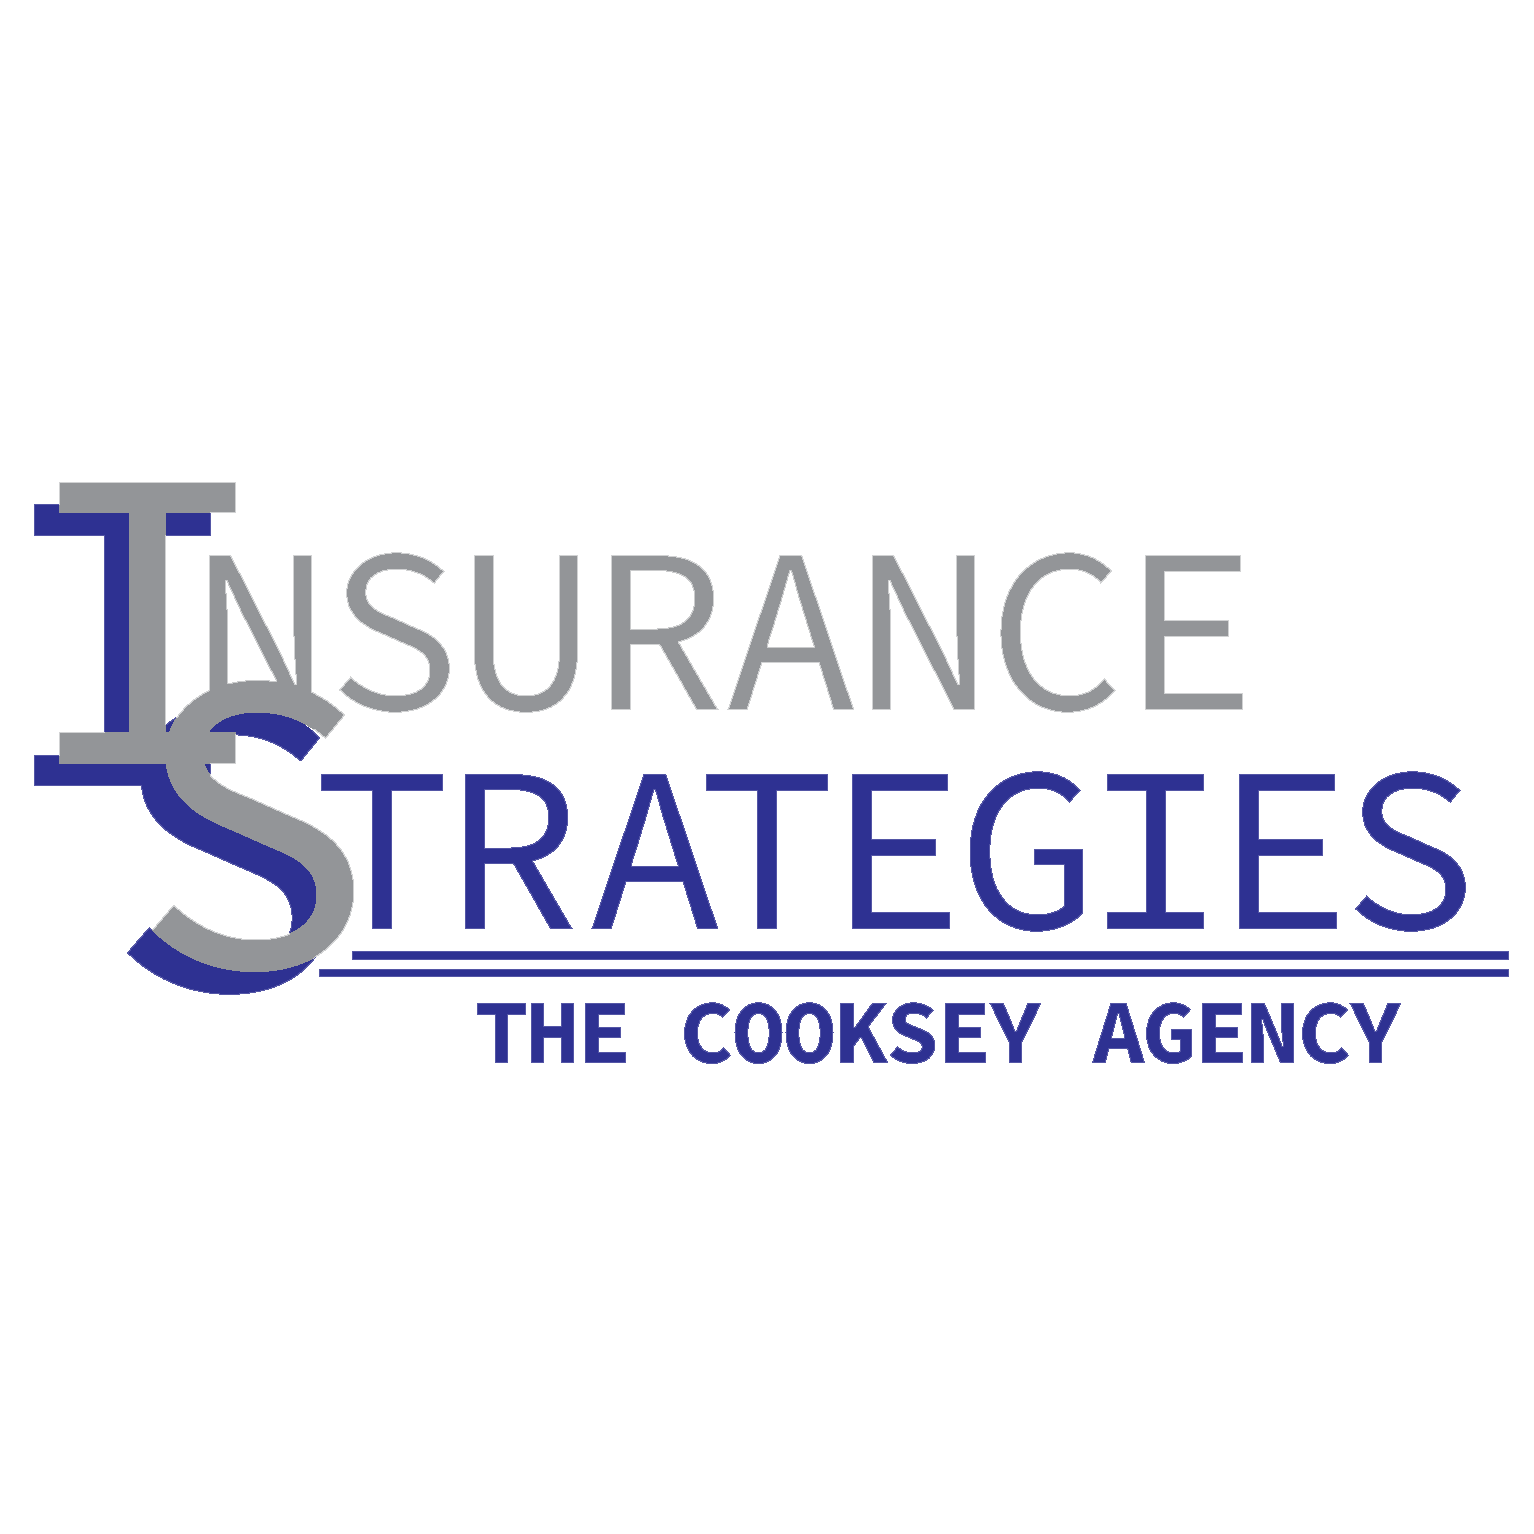 Insurance Strategies The Cooksey Agency Logo